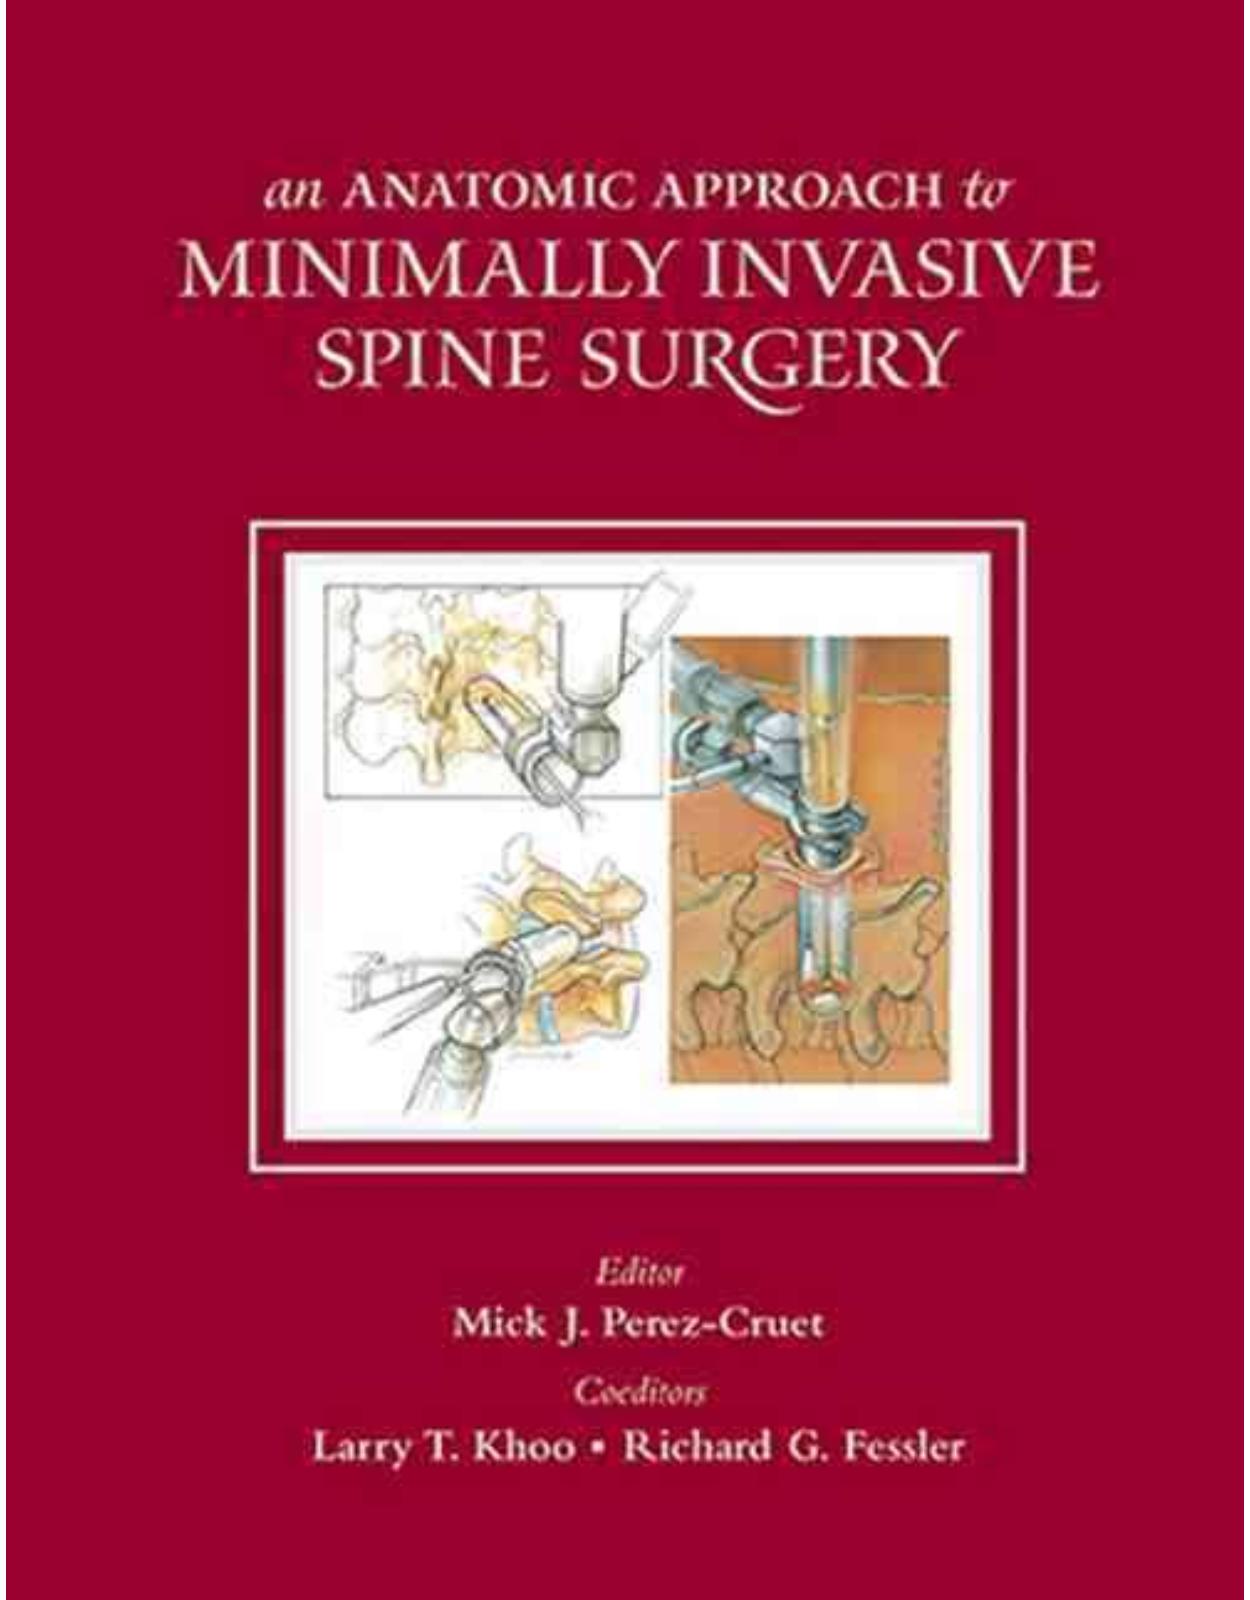 Anatomic Approach to Minimally Invasive Spine Surgery, Second Edition